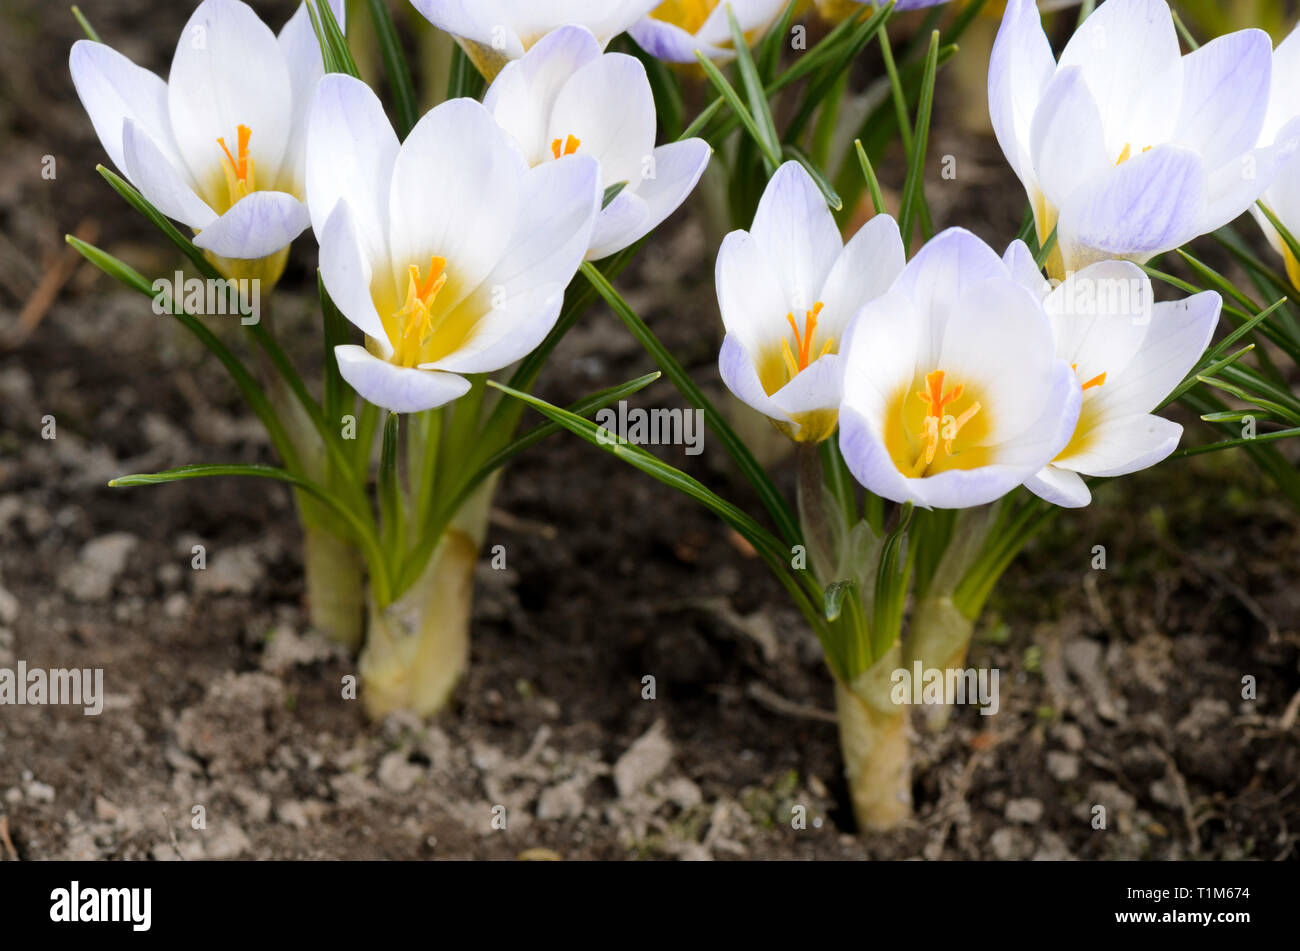 Early spring crocus flowers (Crocus chrysanthus 'Blue Pearl') in the garden. Stock Photo